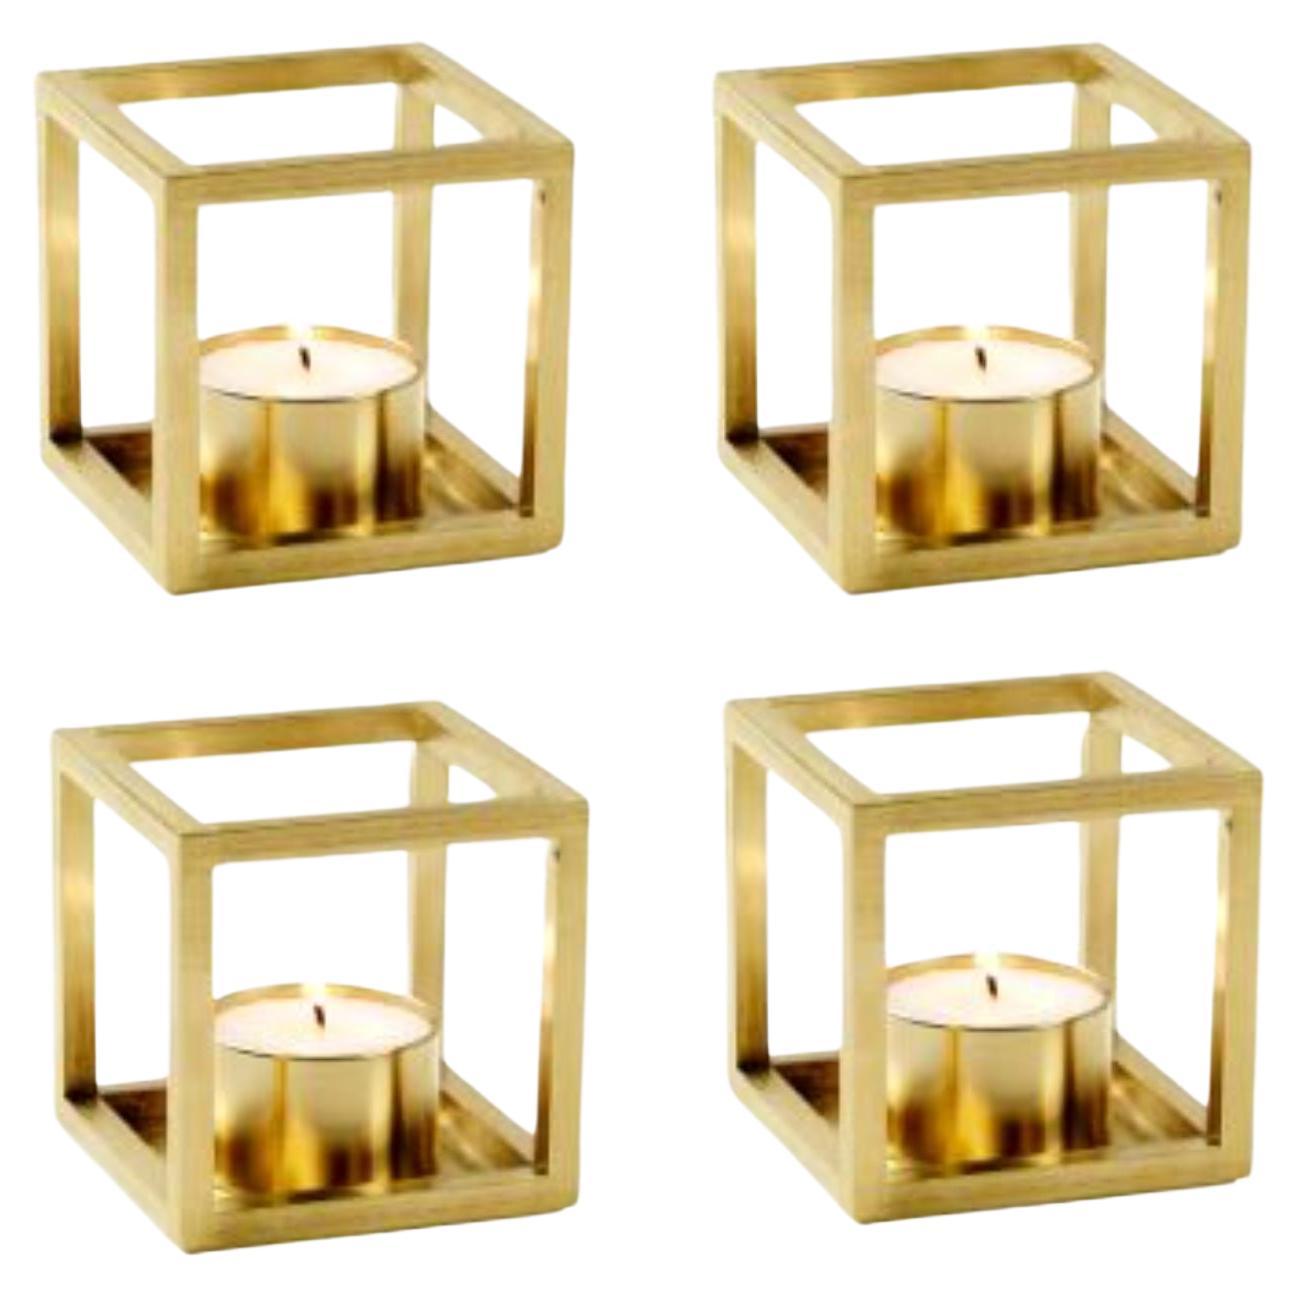 Set of 4 Gold Plated Kubus T Candle Holders by Lassen For Sale